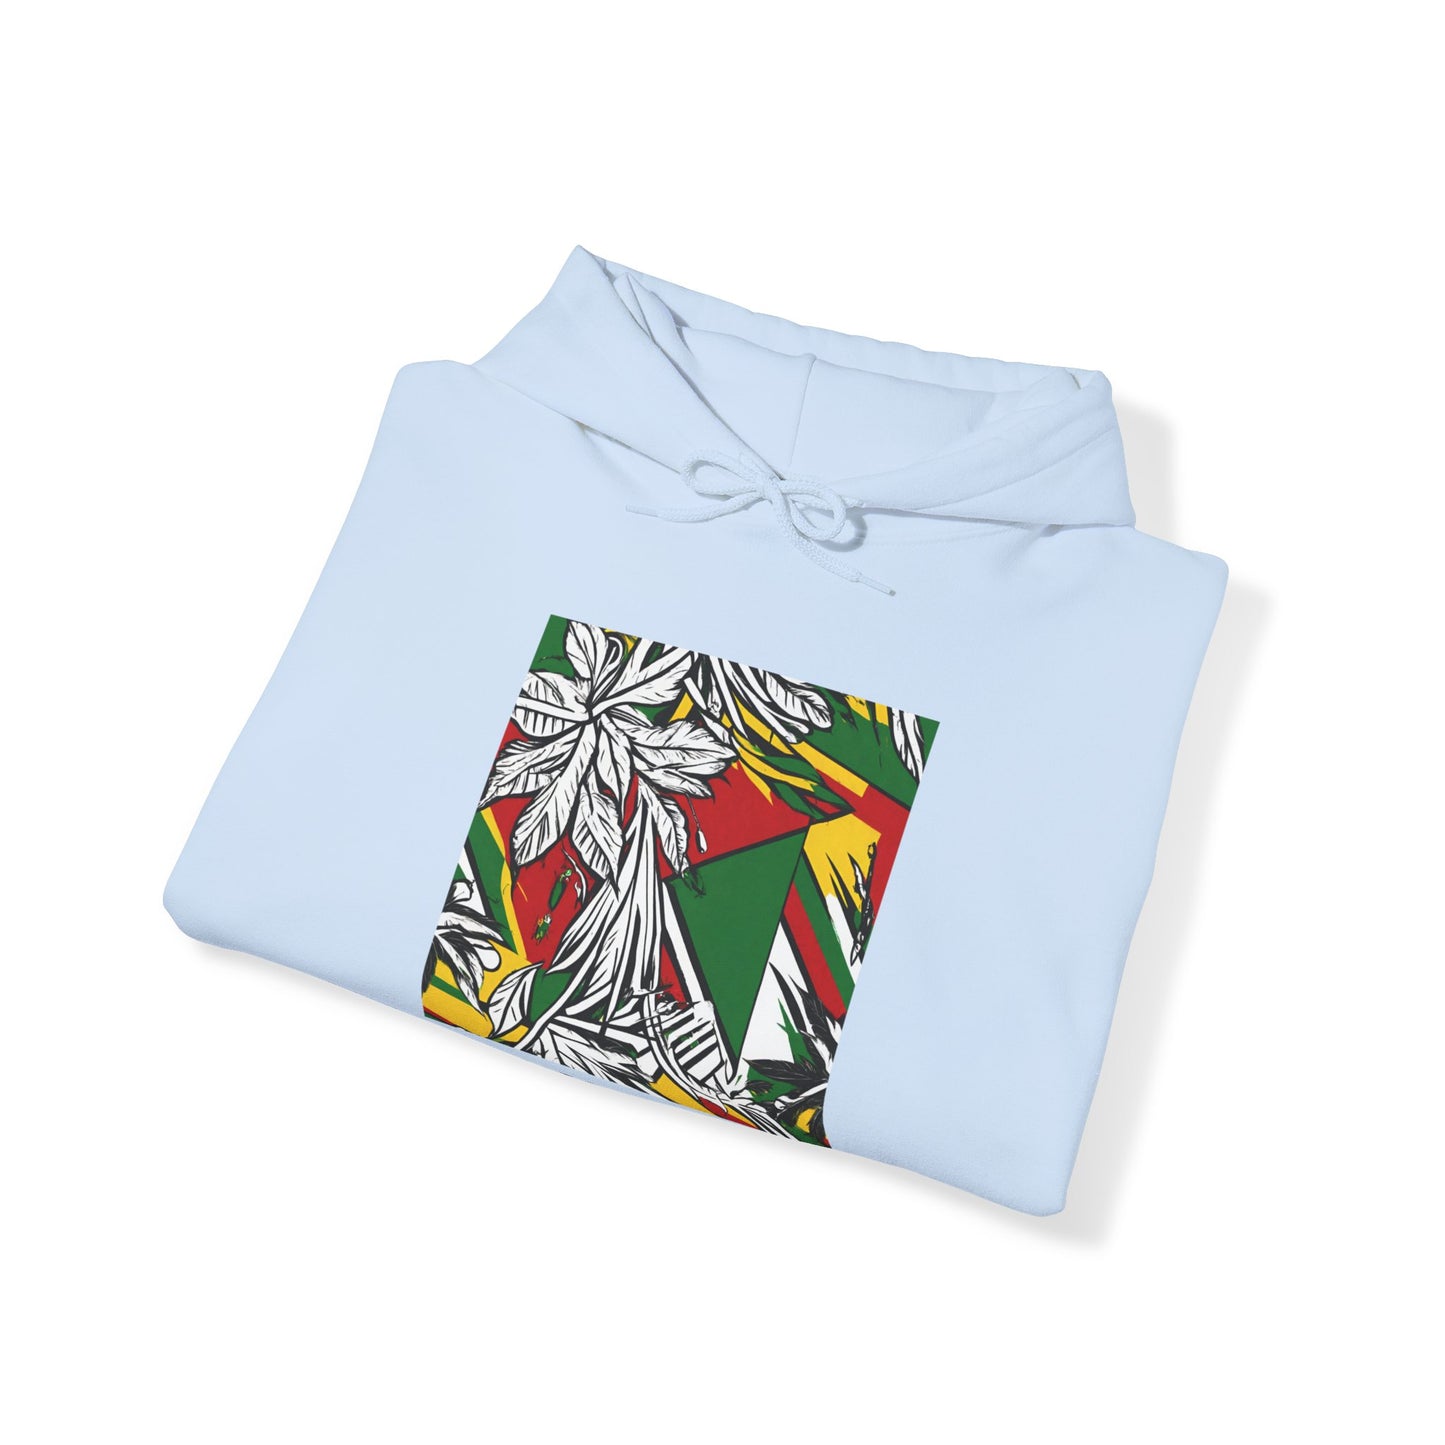 IRIE VYBEZ REGGAE CULTURE GRAPHIC HOODIE GIFT